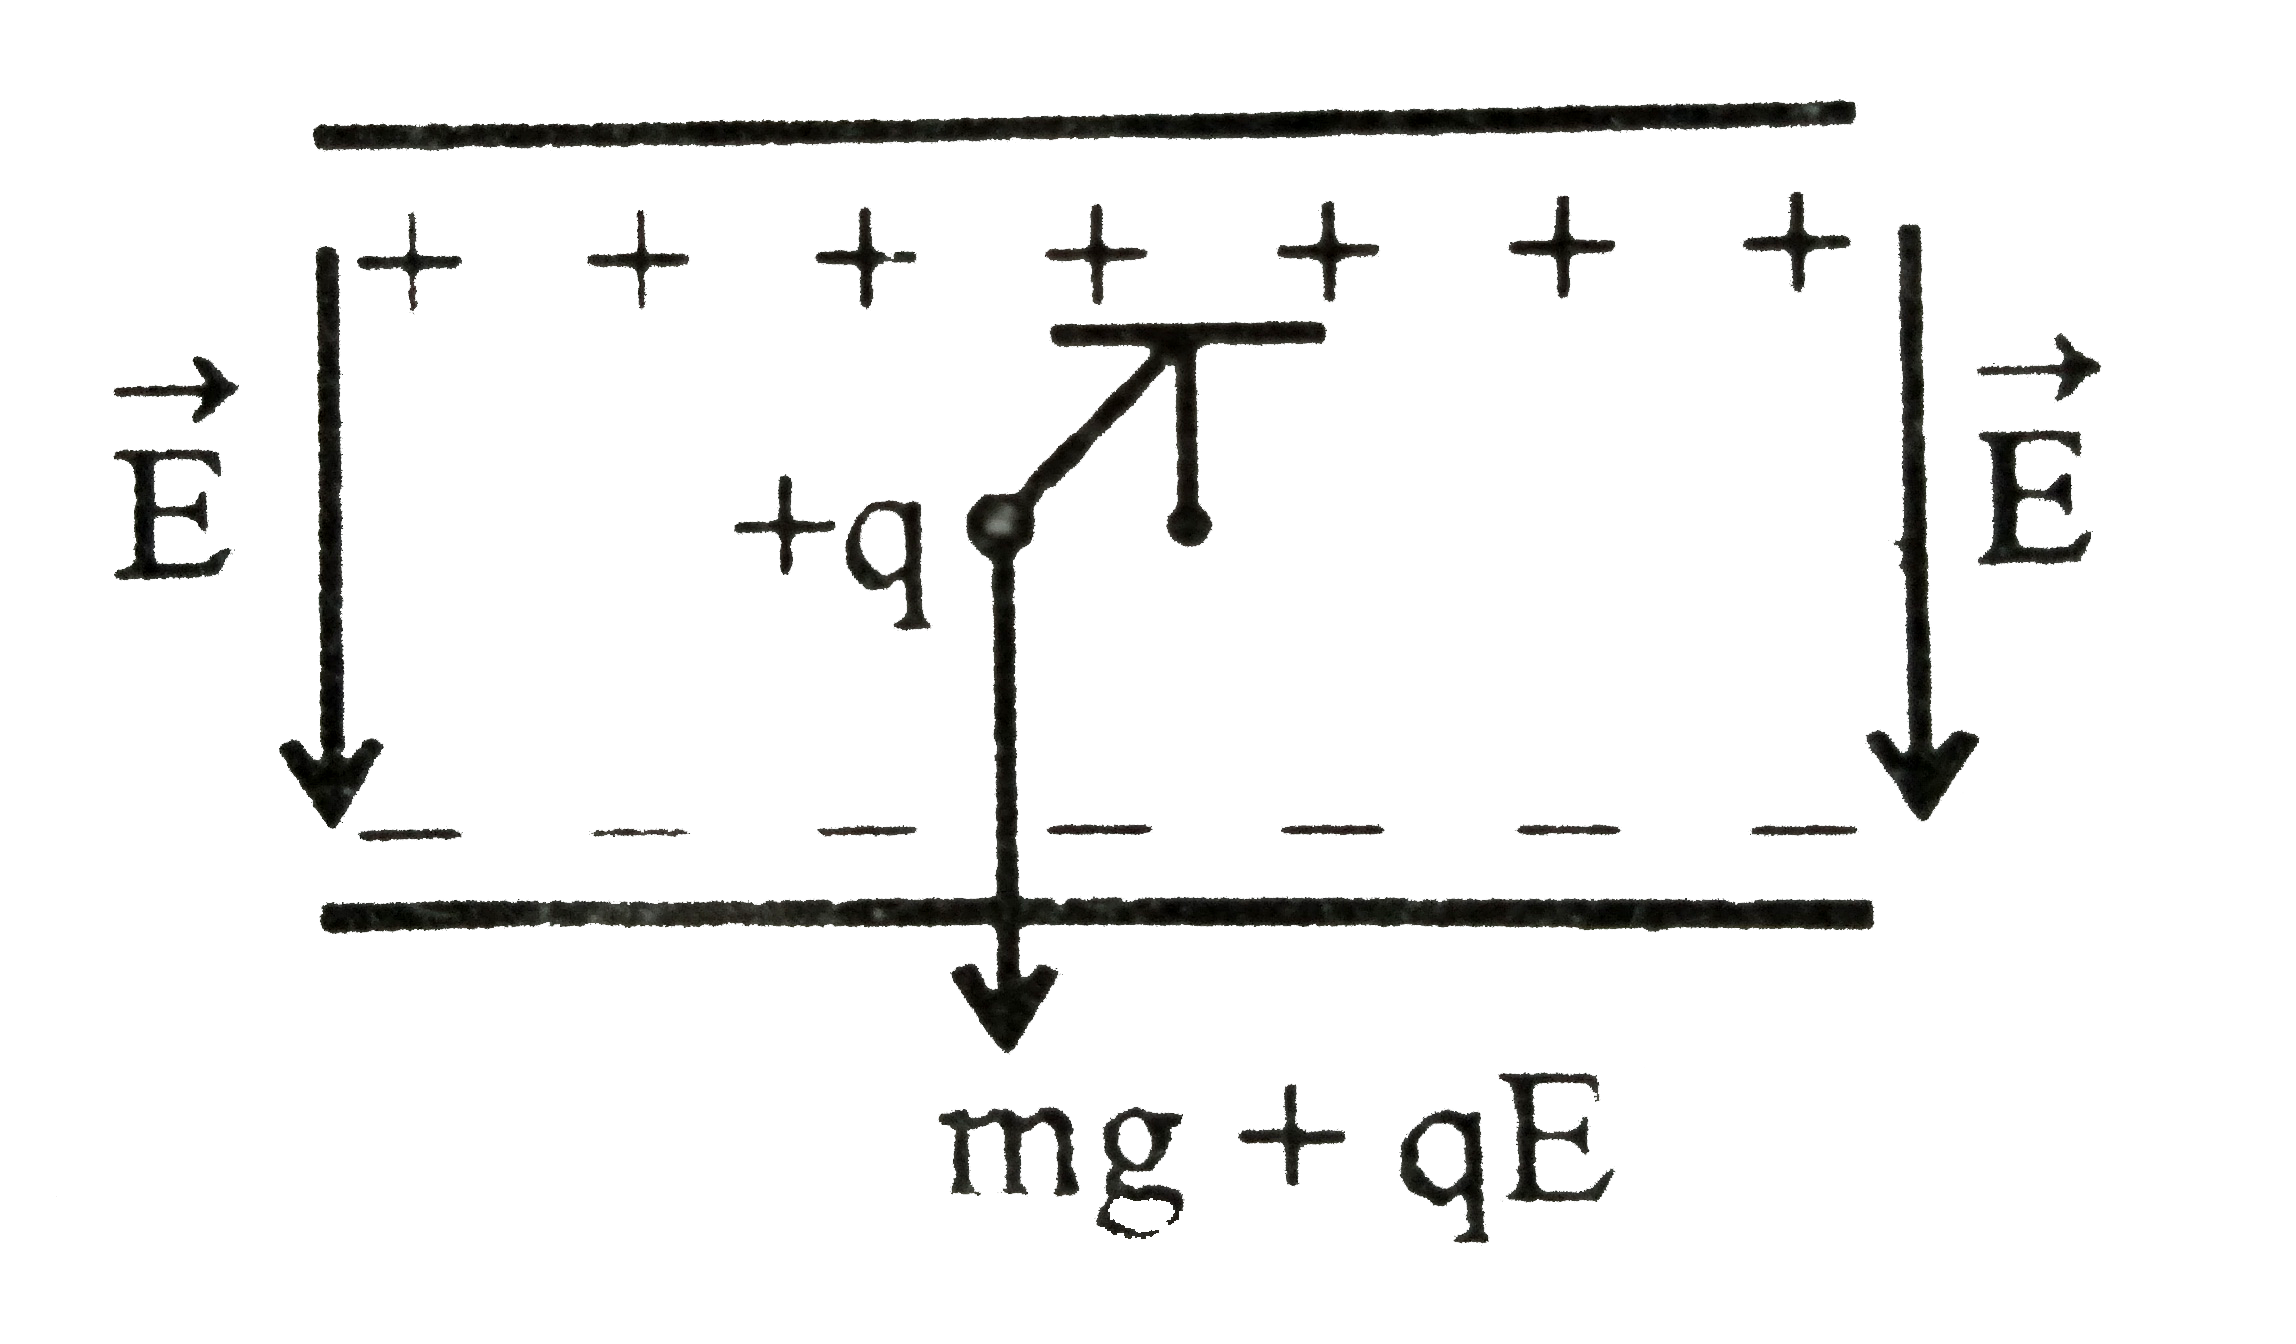 A simple pendulum having caharge  q1 mass ma and effective length 1, is suspended from a rigid support between the plates of charged horizontal capacitor. Electric field in the capacitor is perpendicular to the plates and directed vertically downwards .      The time period of oscillation of  the pendulum. if plates are held vertically , is given by :